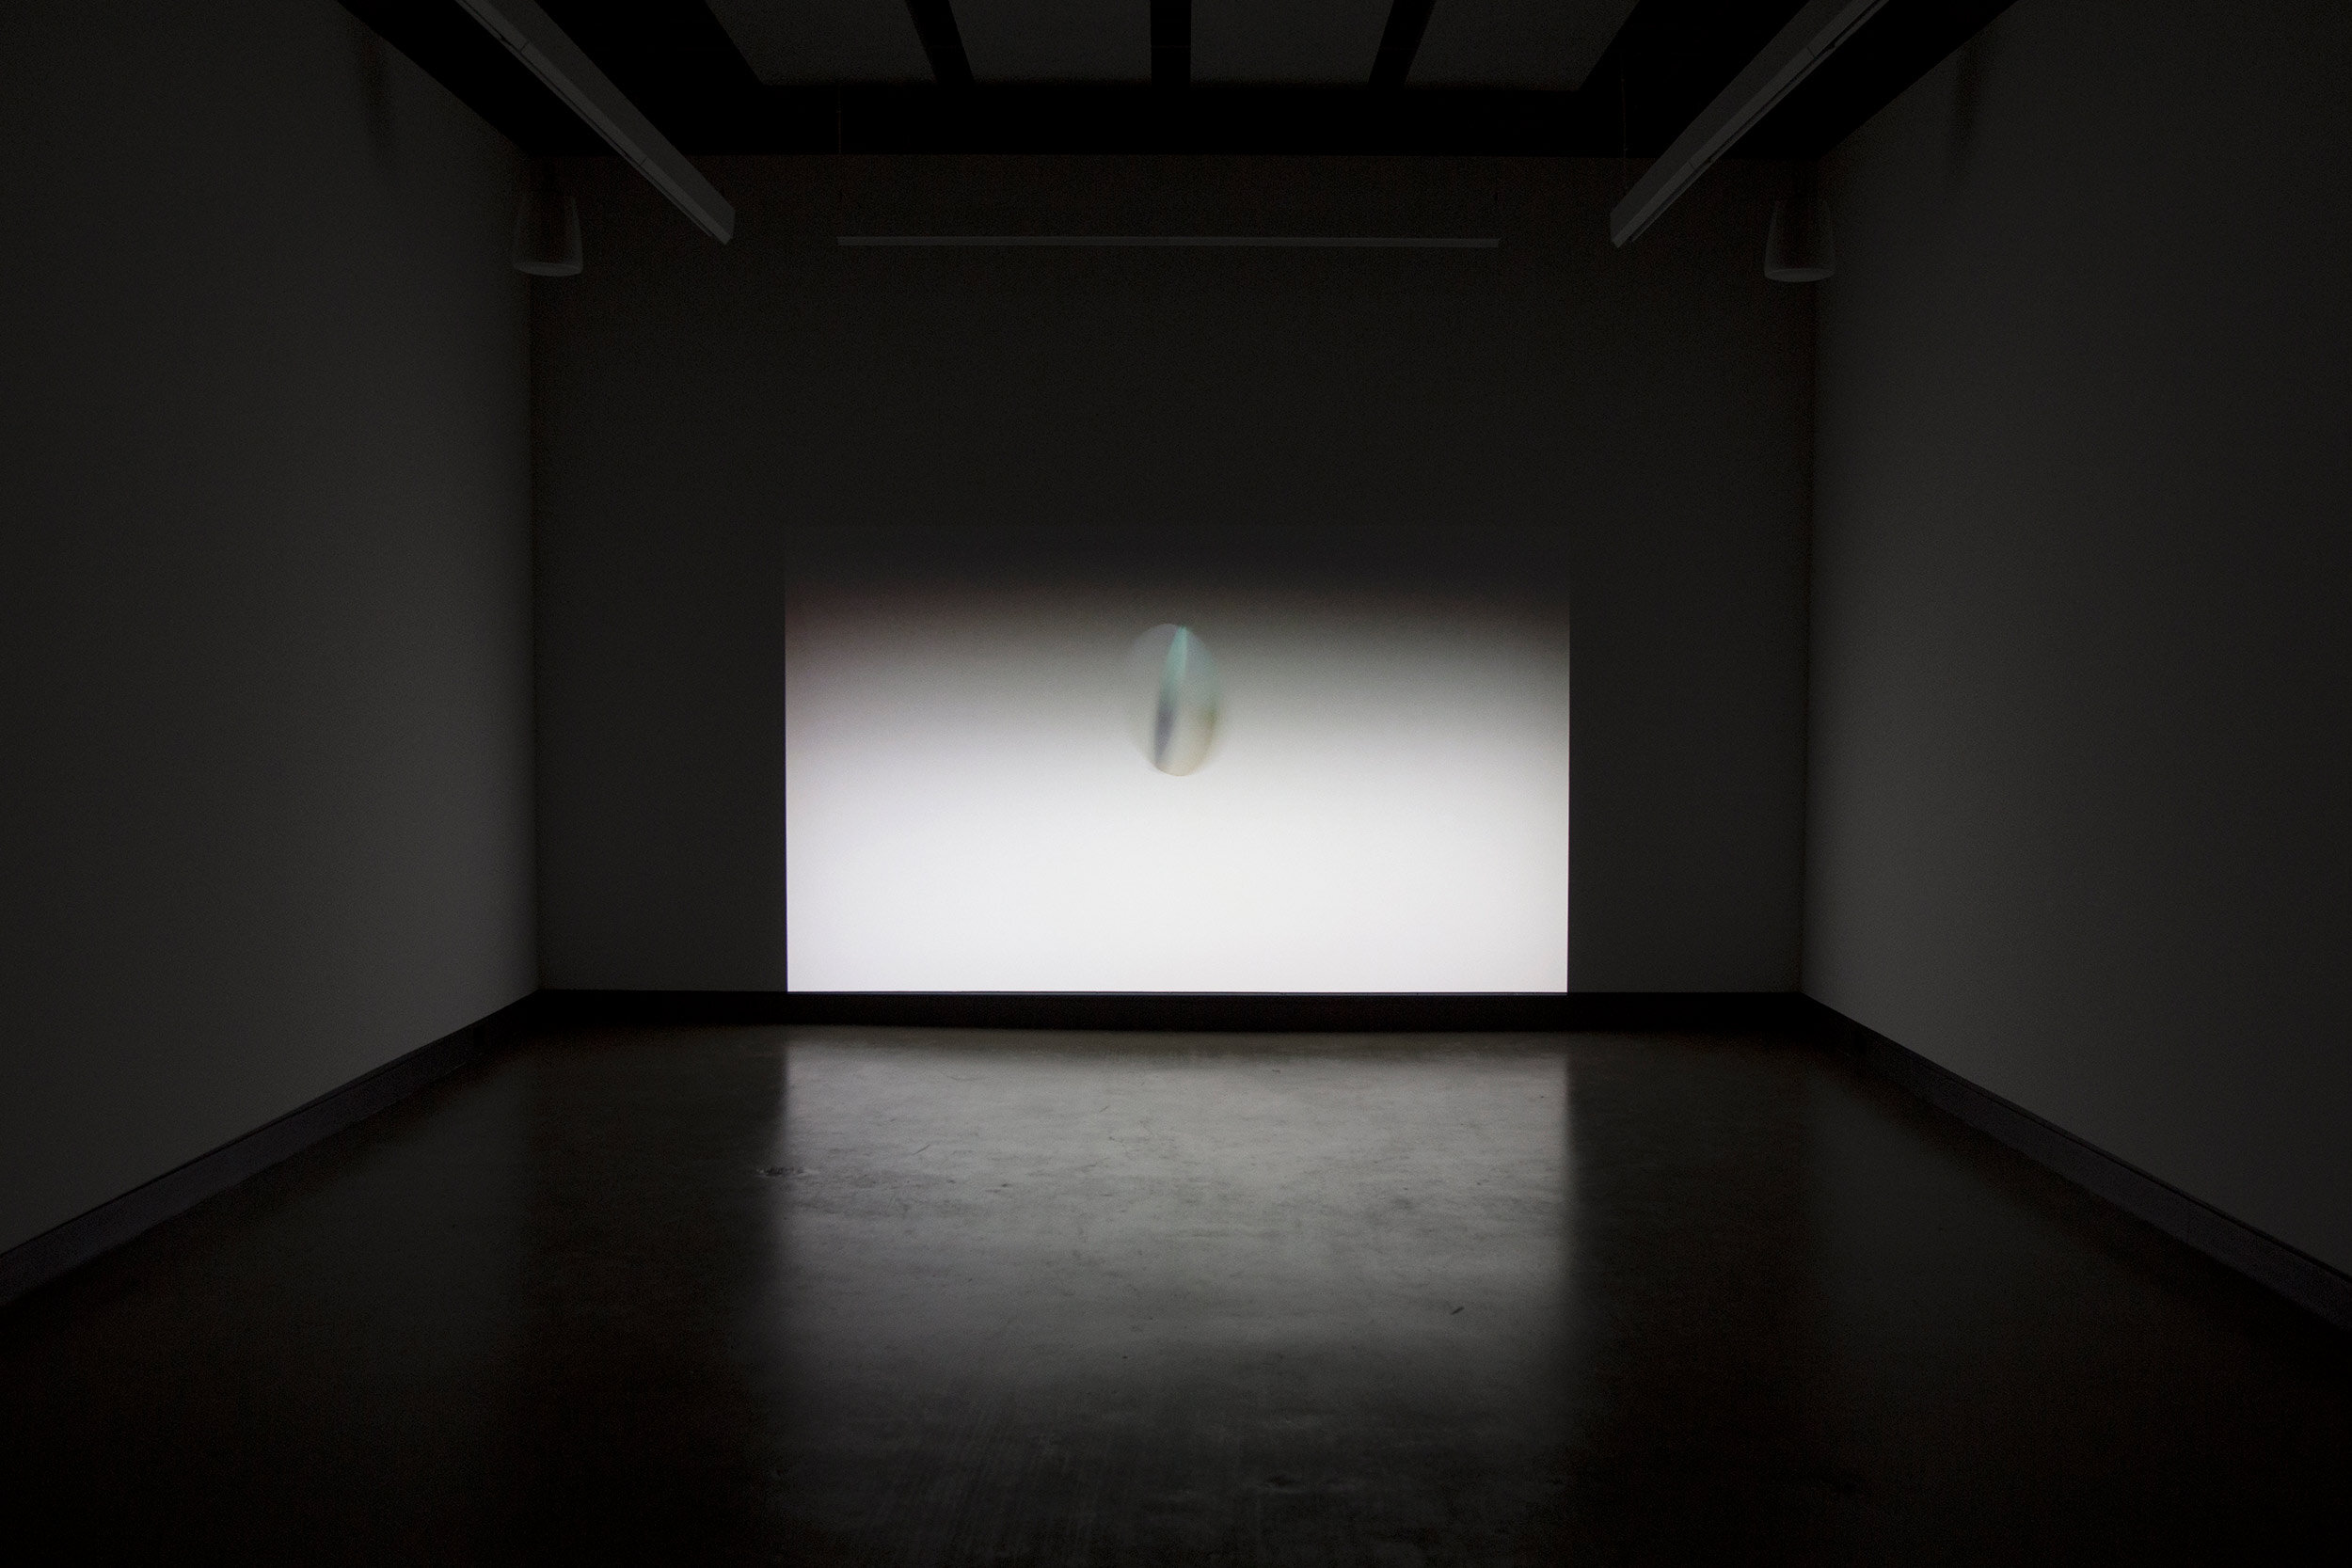  © Scott Massey,  Untitled (An object kindly enclyning)  (2012). Installation view of the exhibition  Light Adjustments , Dazibao, 2014-2015. Photo: Sara A. Tremblay. 